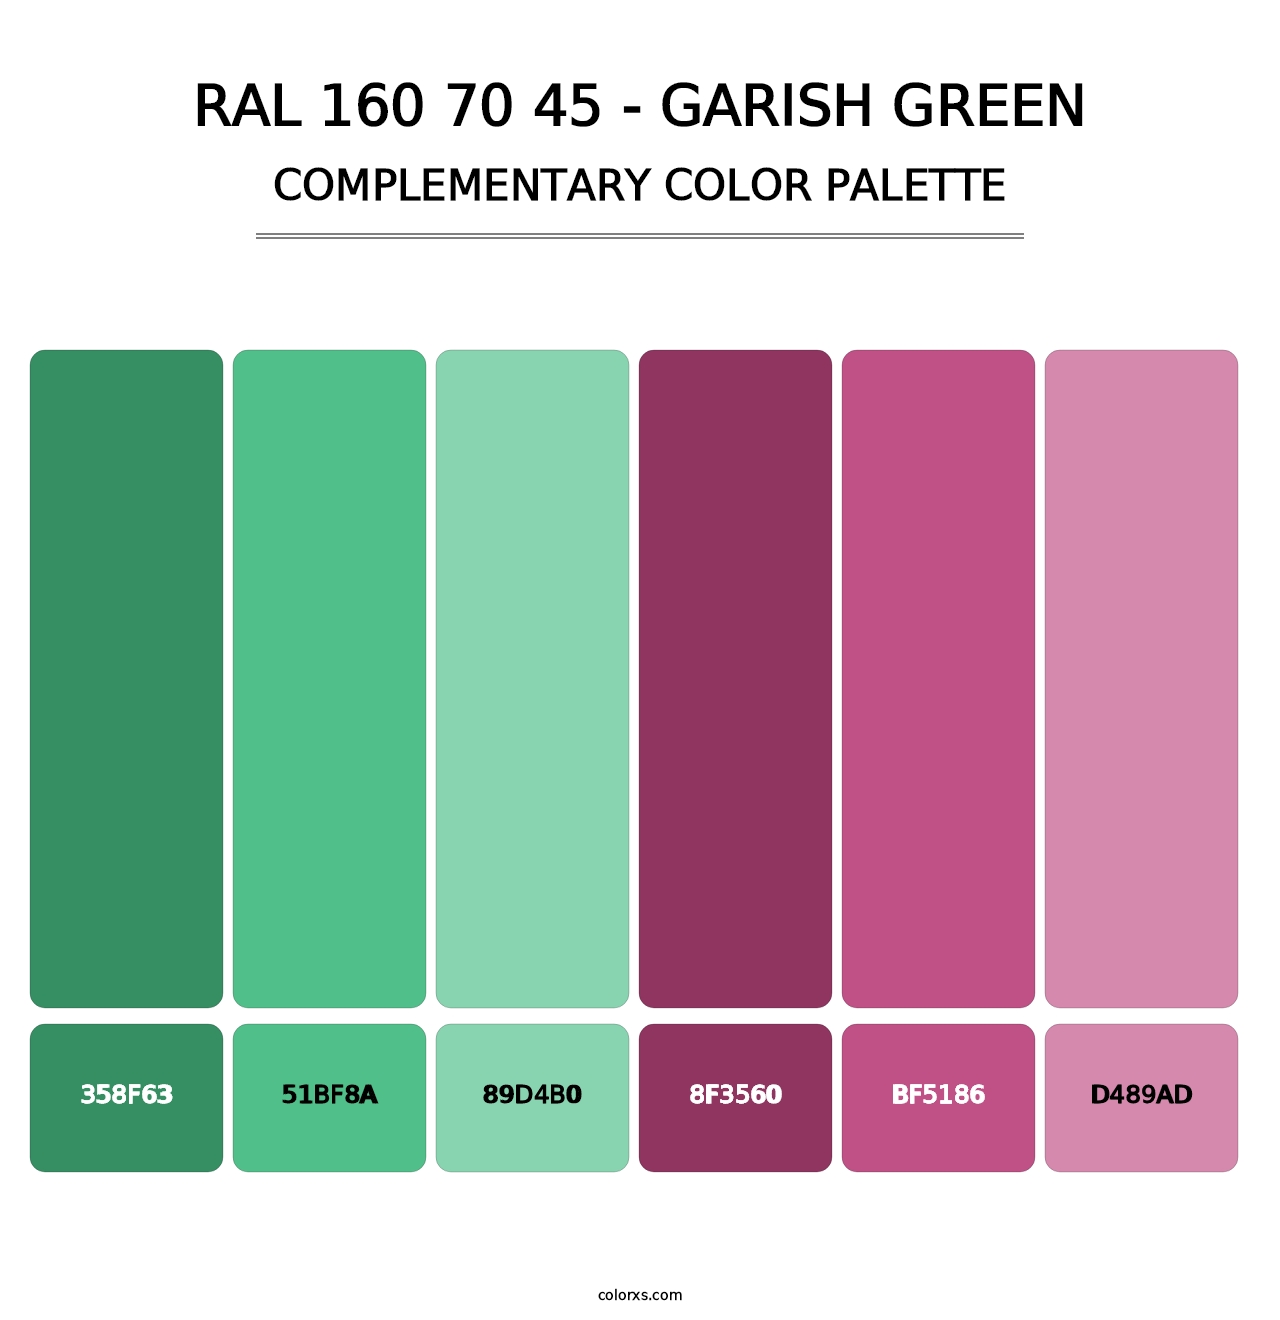 RAL 160 70 45 - Garish Green - Complementary Color Palette